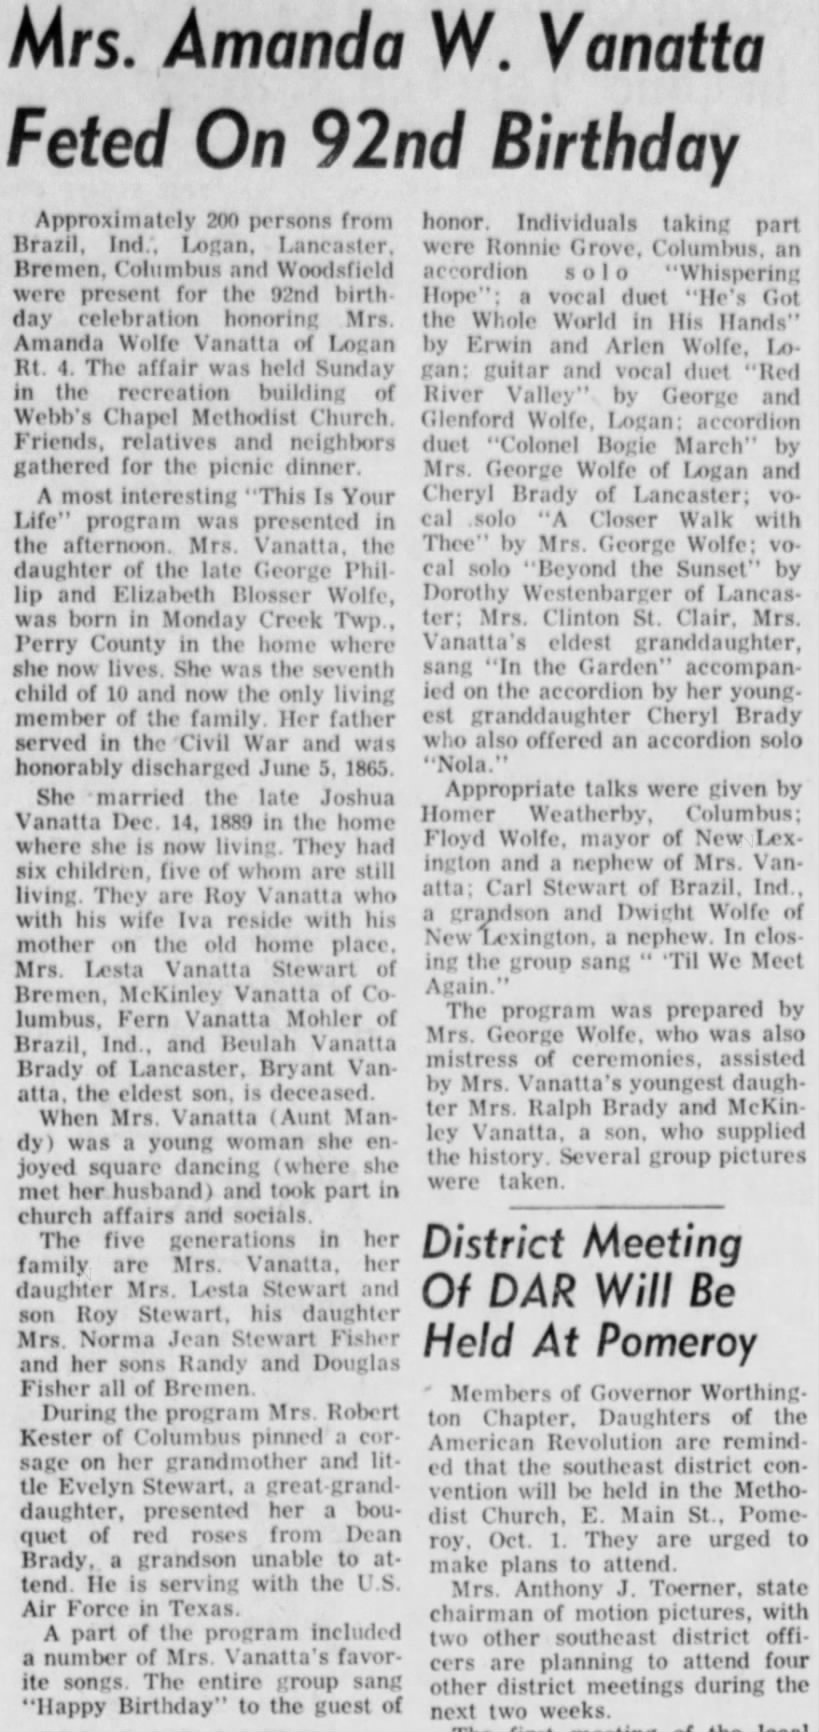 The Logan Daily News (Logan, Ohio) 
Tuesday, September 22, 1959 - Page 5